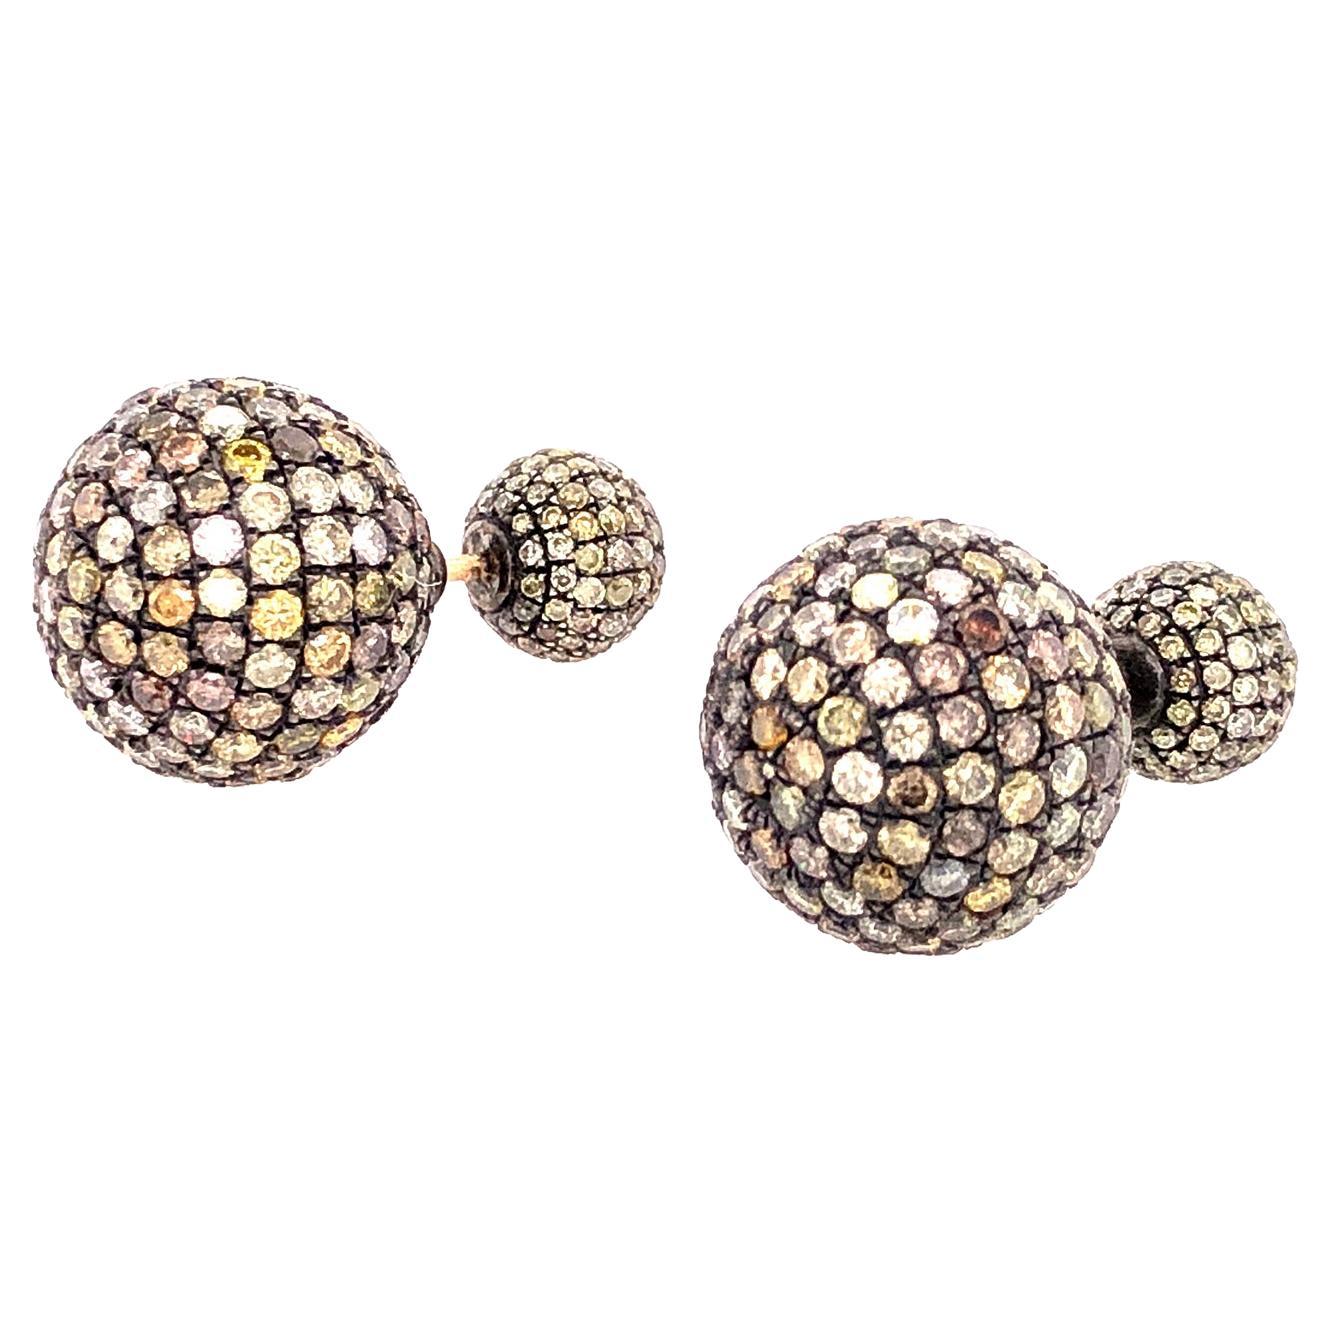 Pave Diamond Ball Tunnel Earrings Made in 14k Gold & Silver For Sale